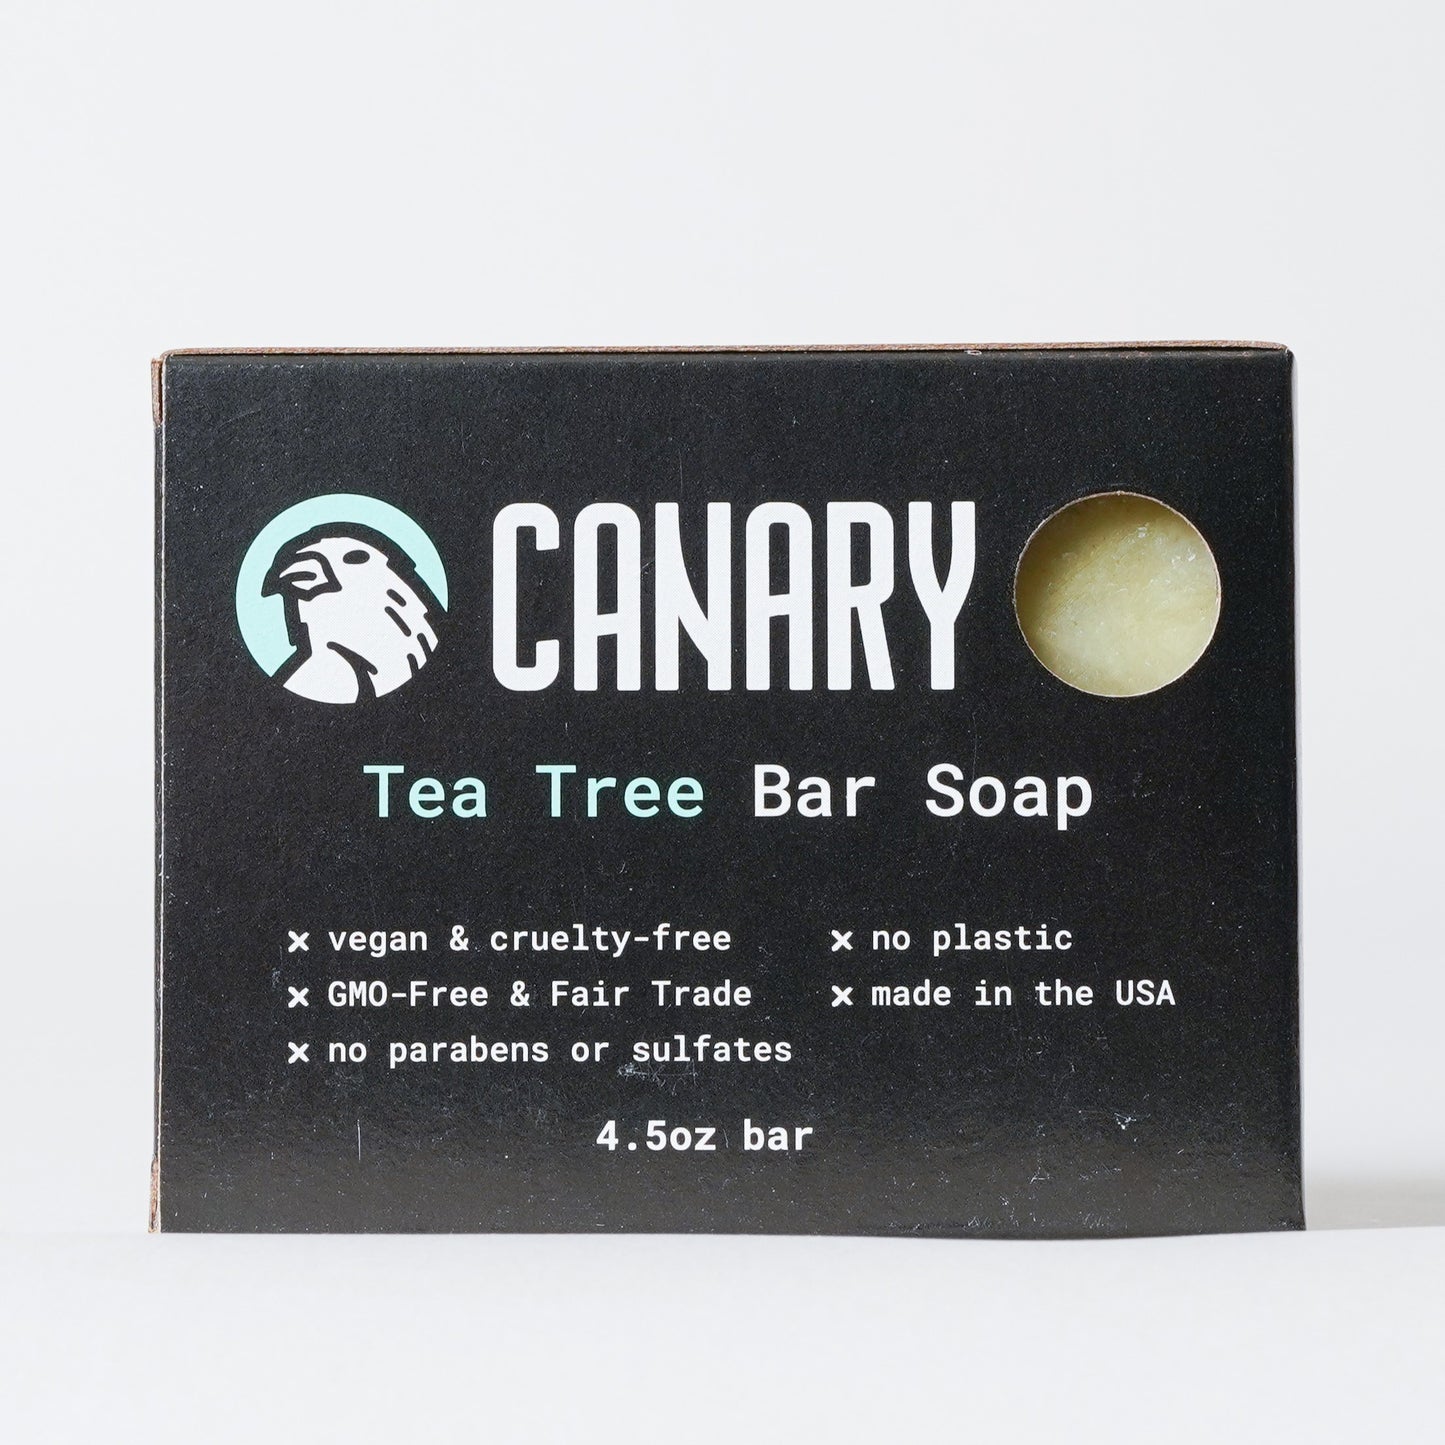 Canary Tea Tree Bar Soap in plastic-free packaging